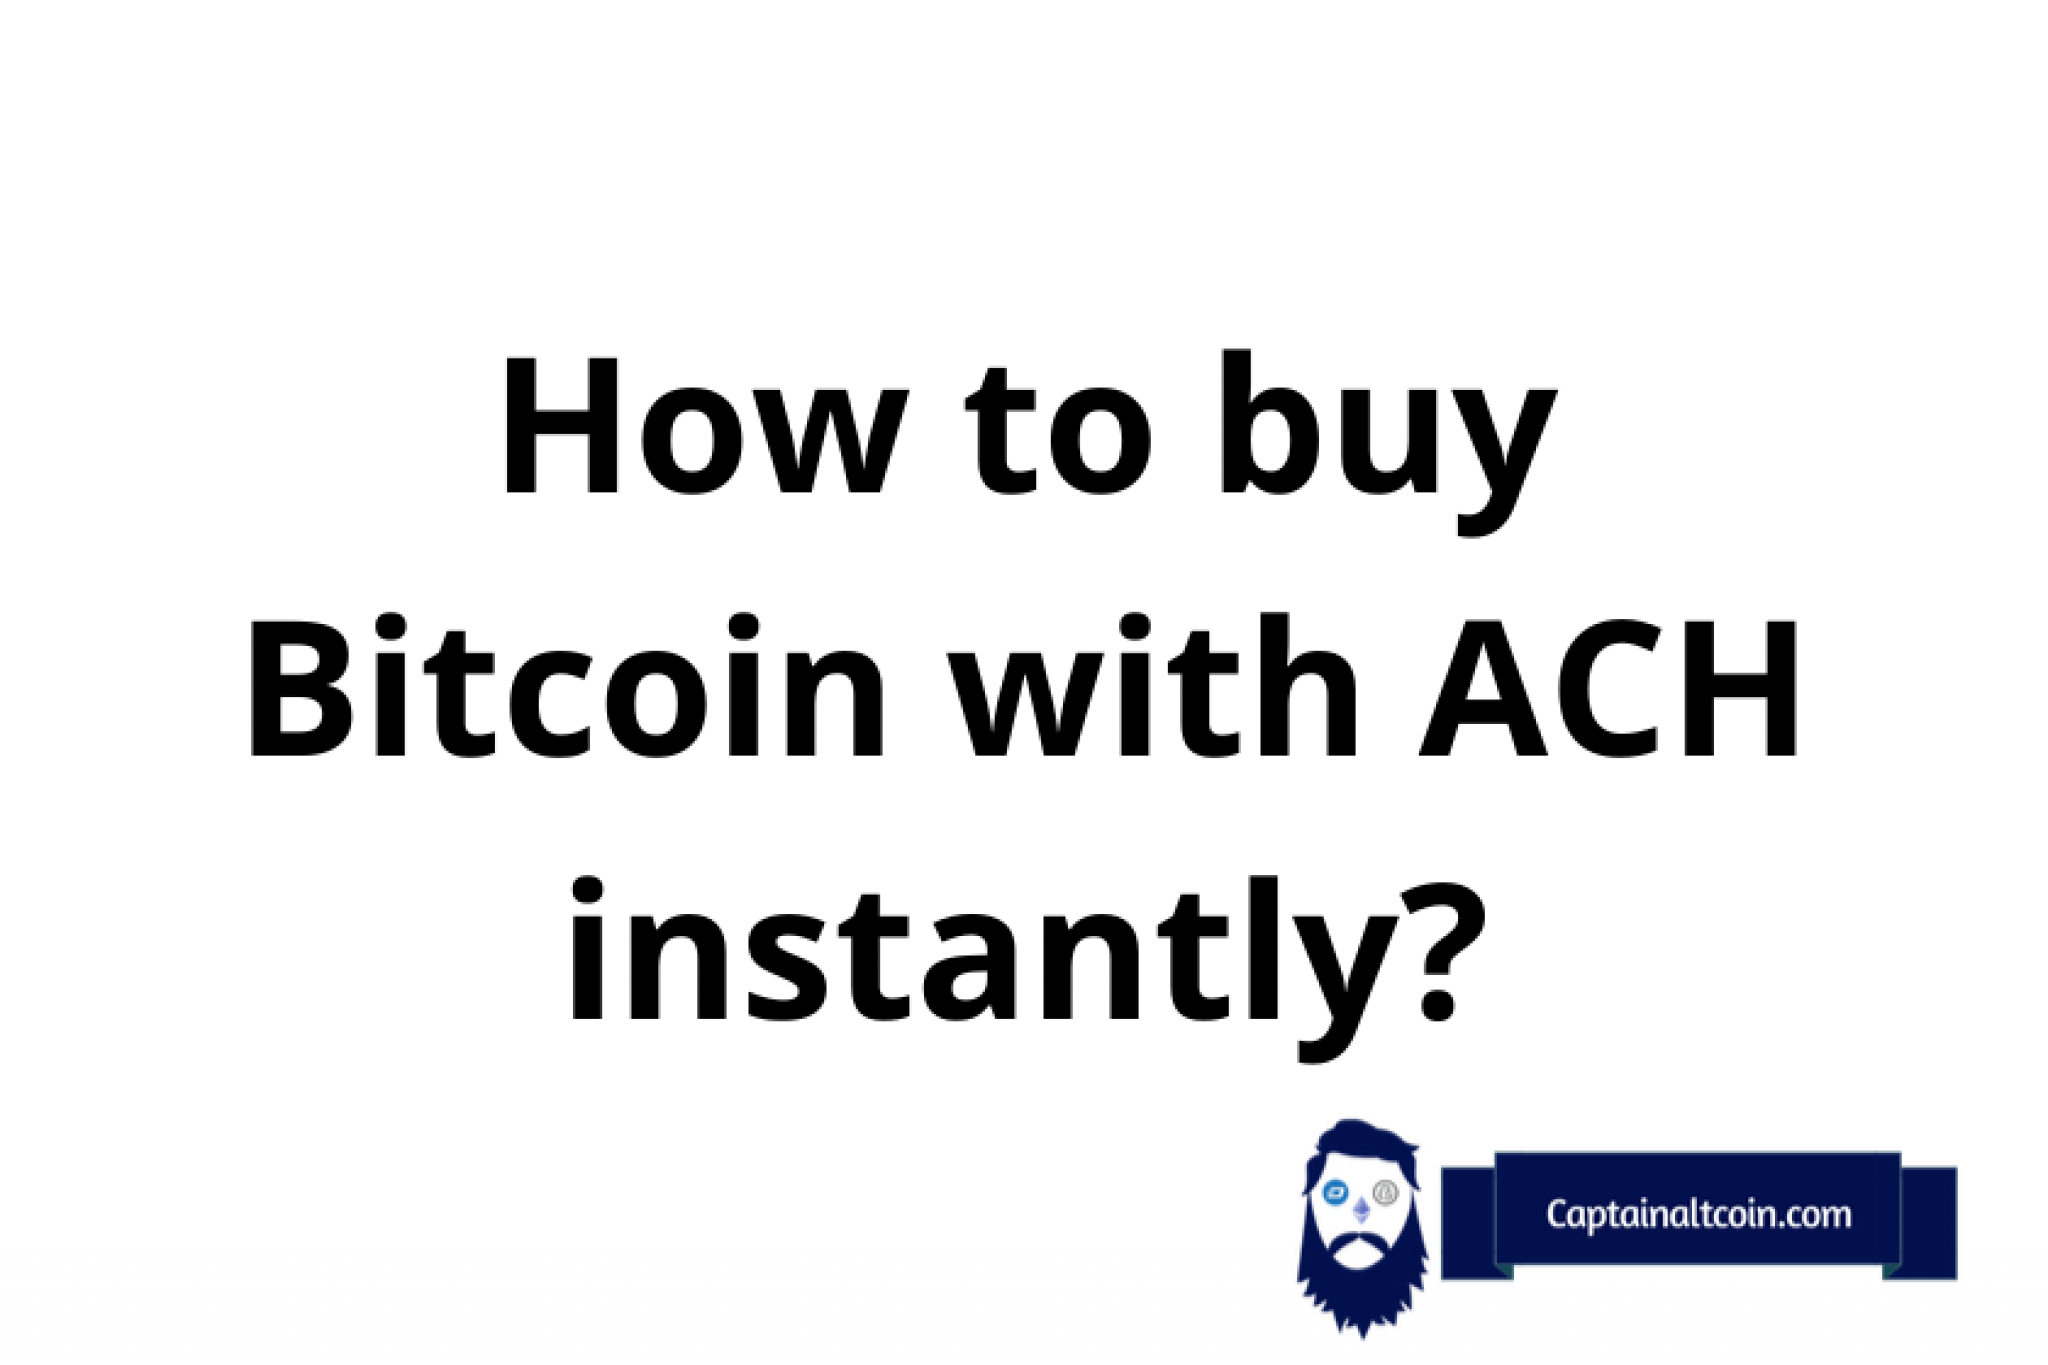 ach bitcoins instantly